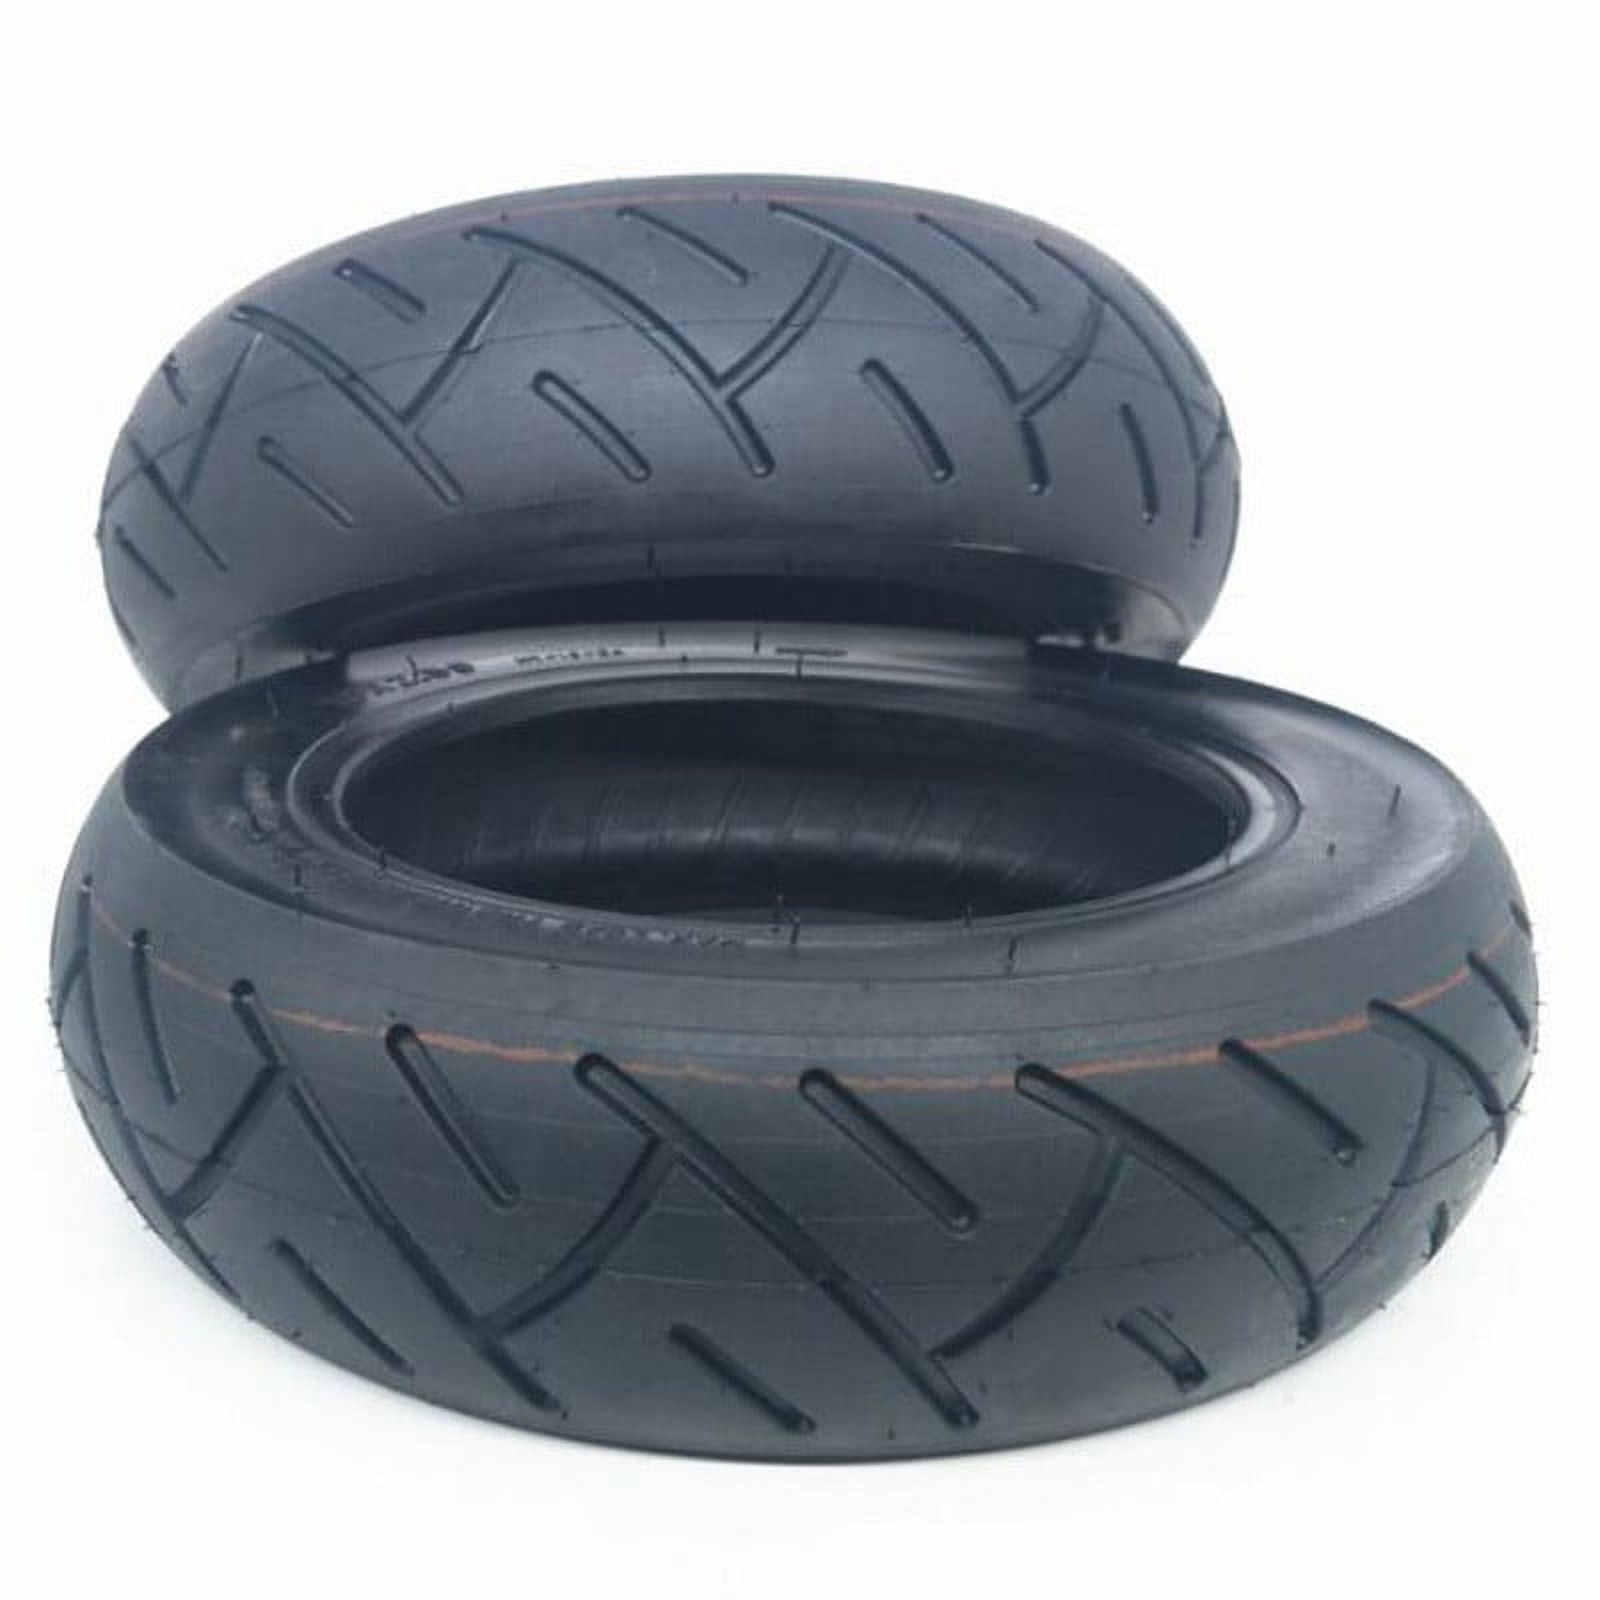 Electric Scooter Tire Rubber 10X2.50 Inner Tube Spare Replacement Parts - image 4 of 7